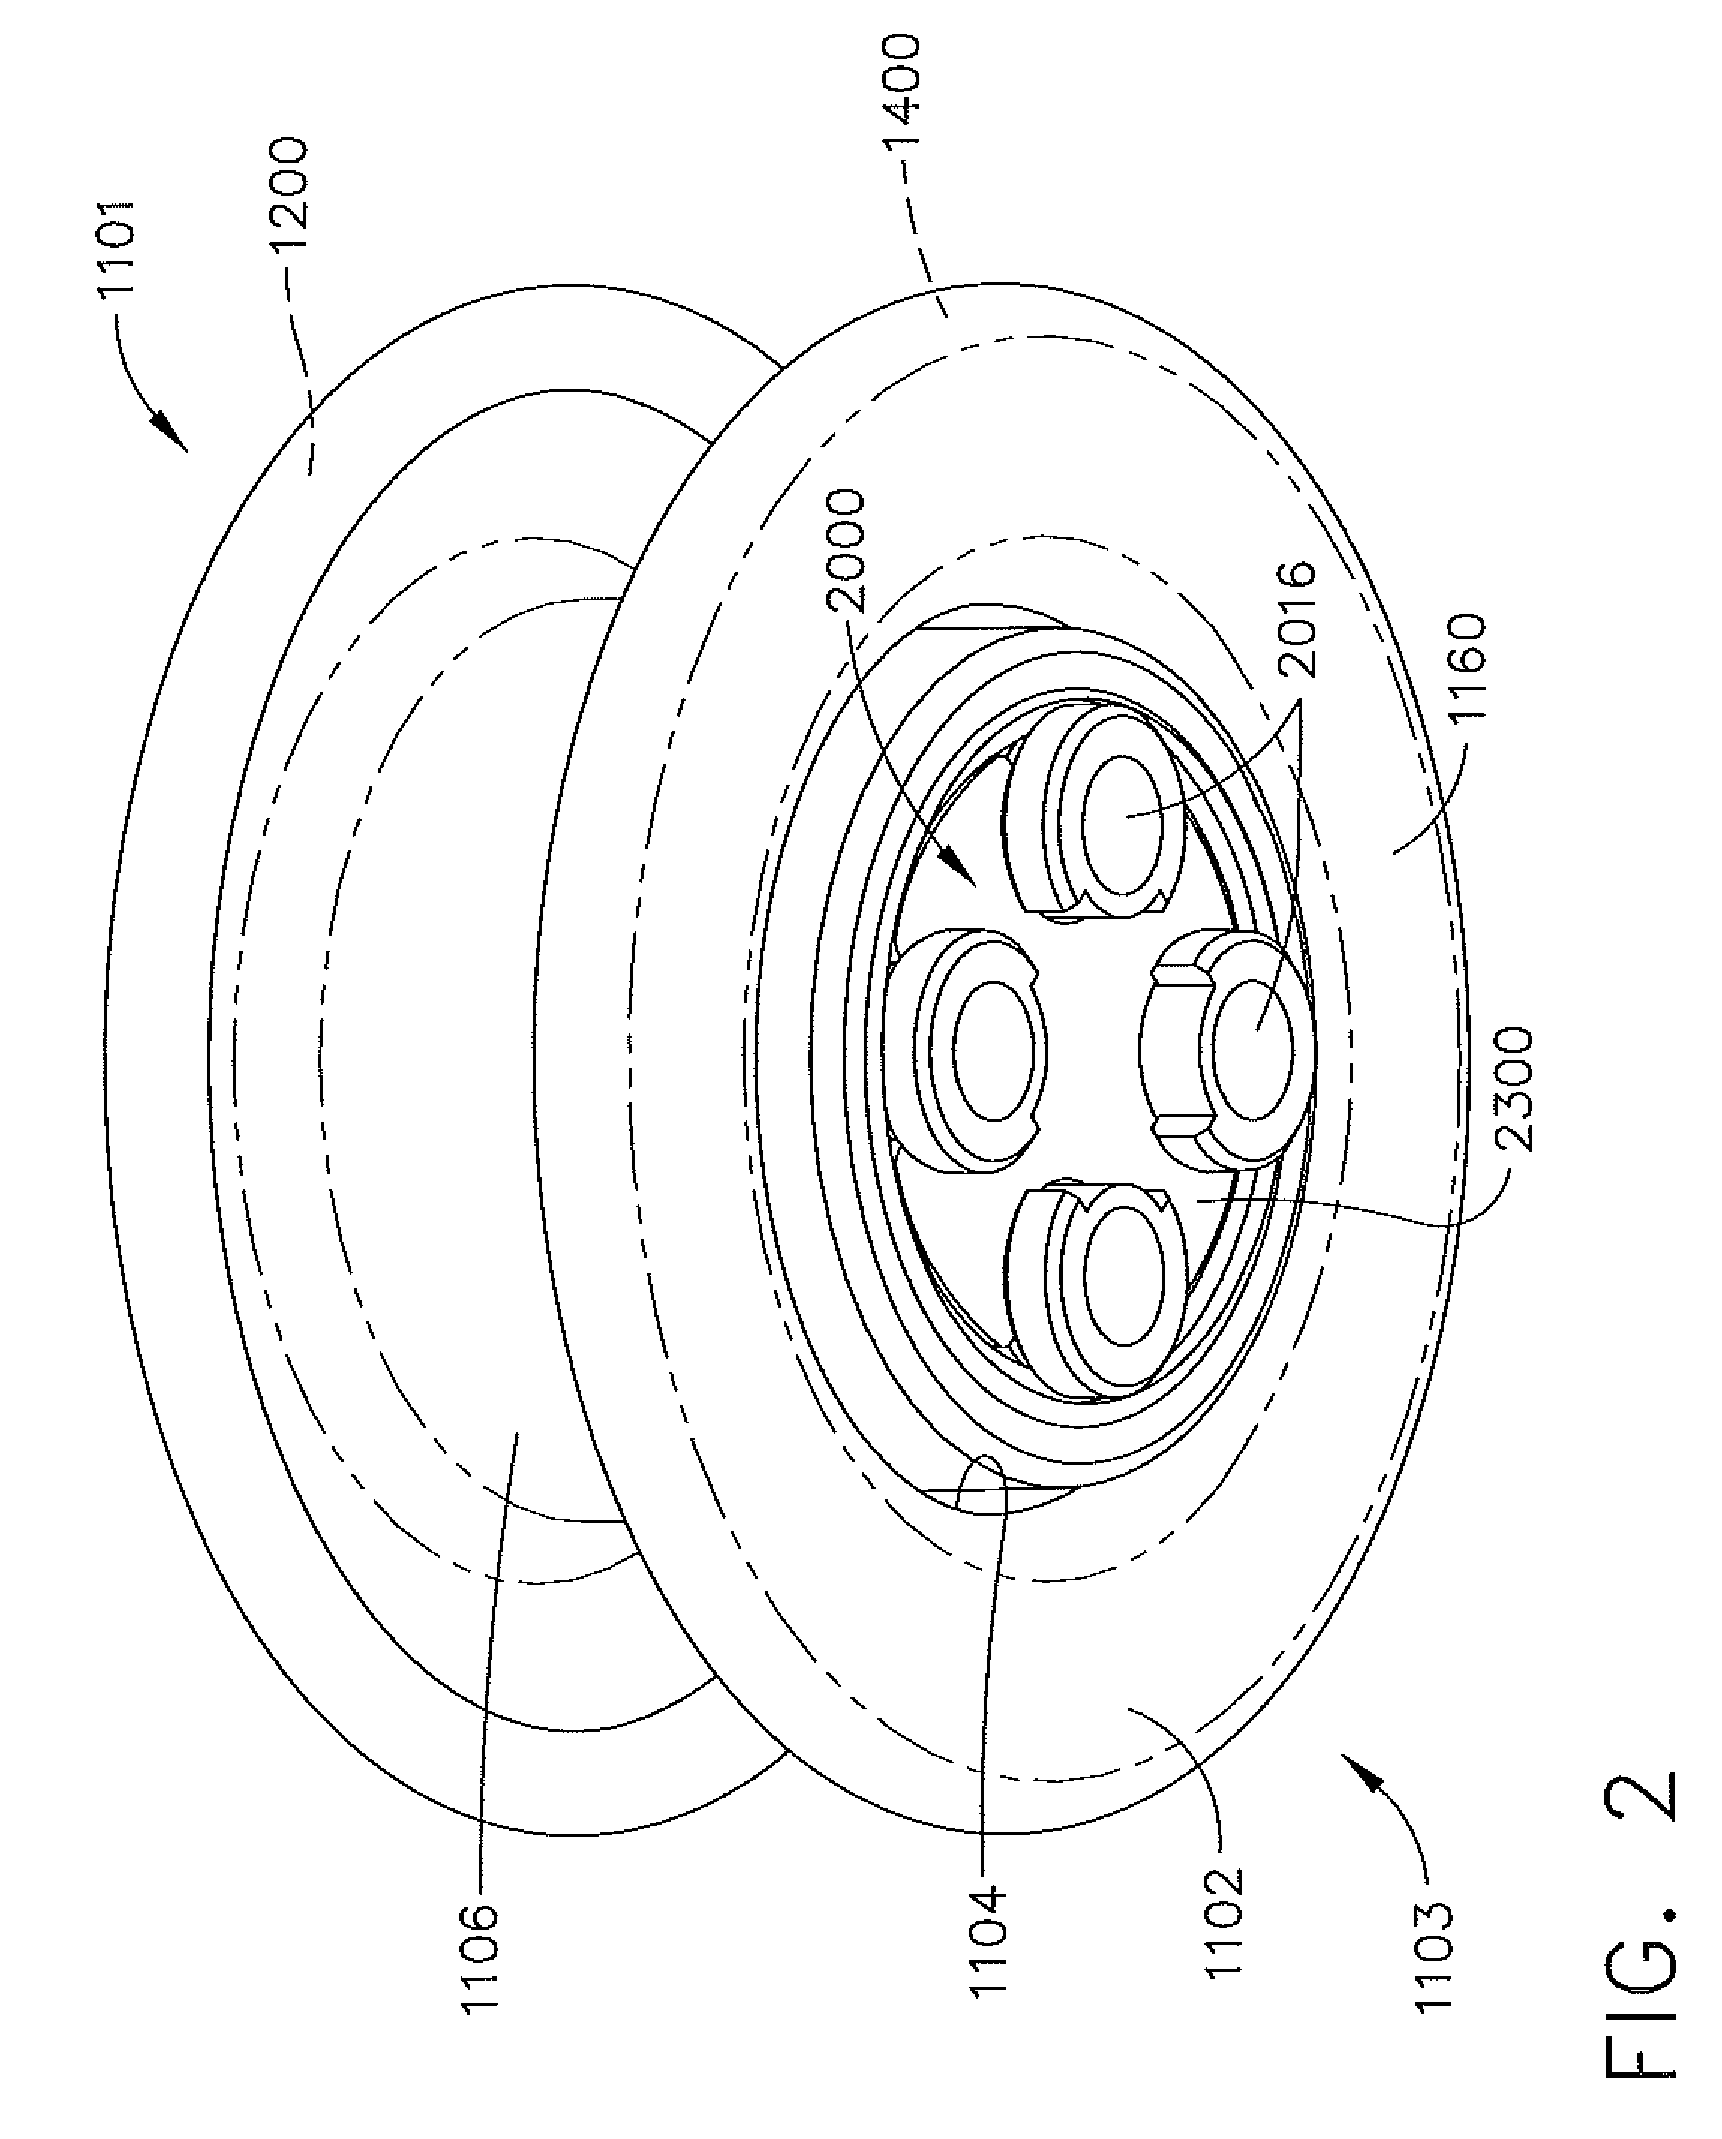 Access device with insert